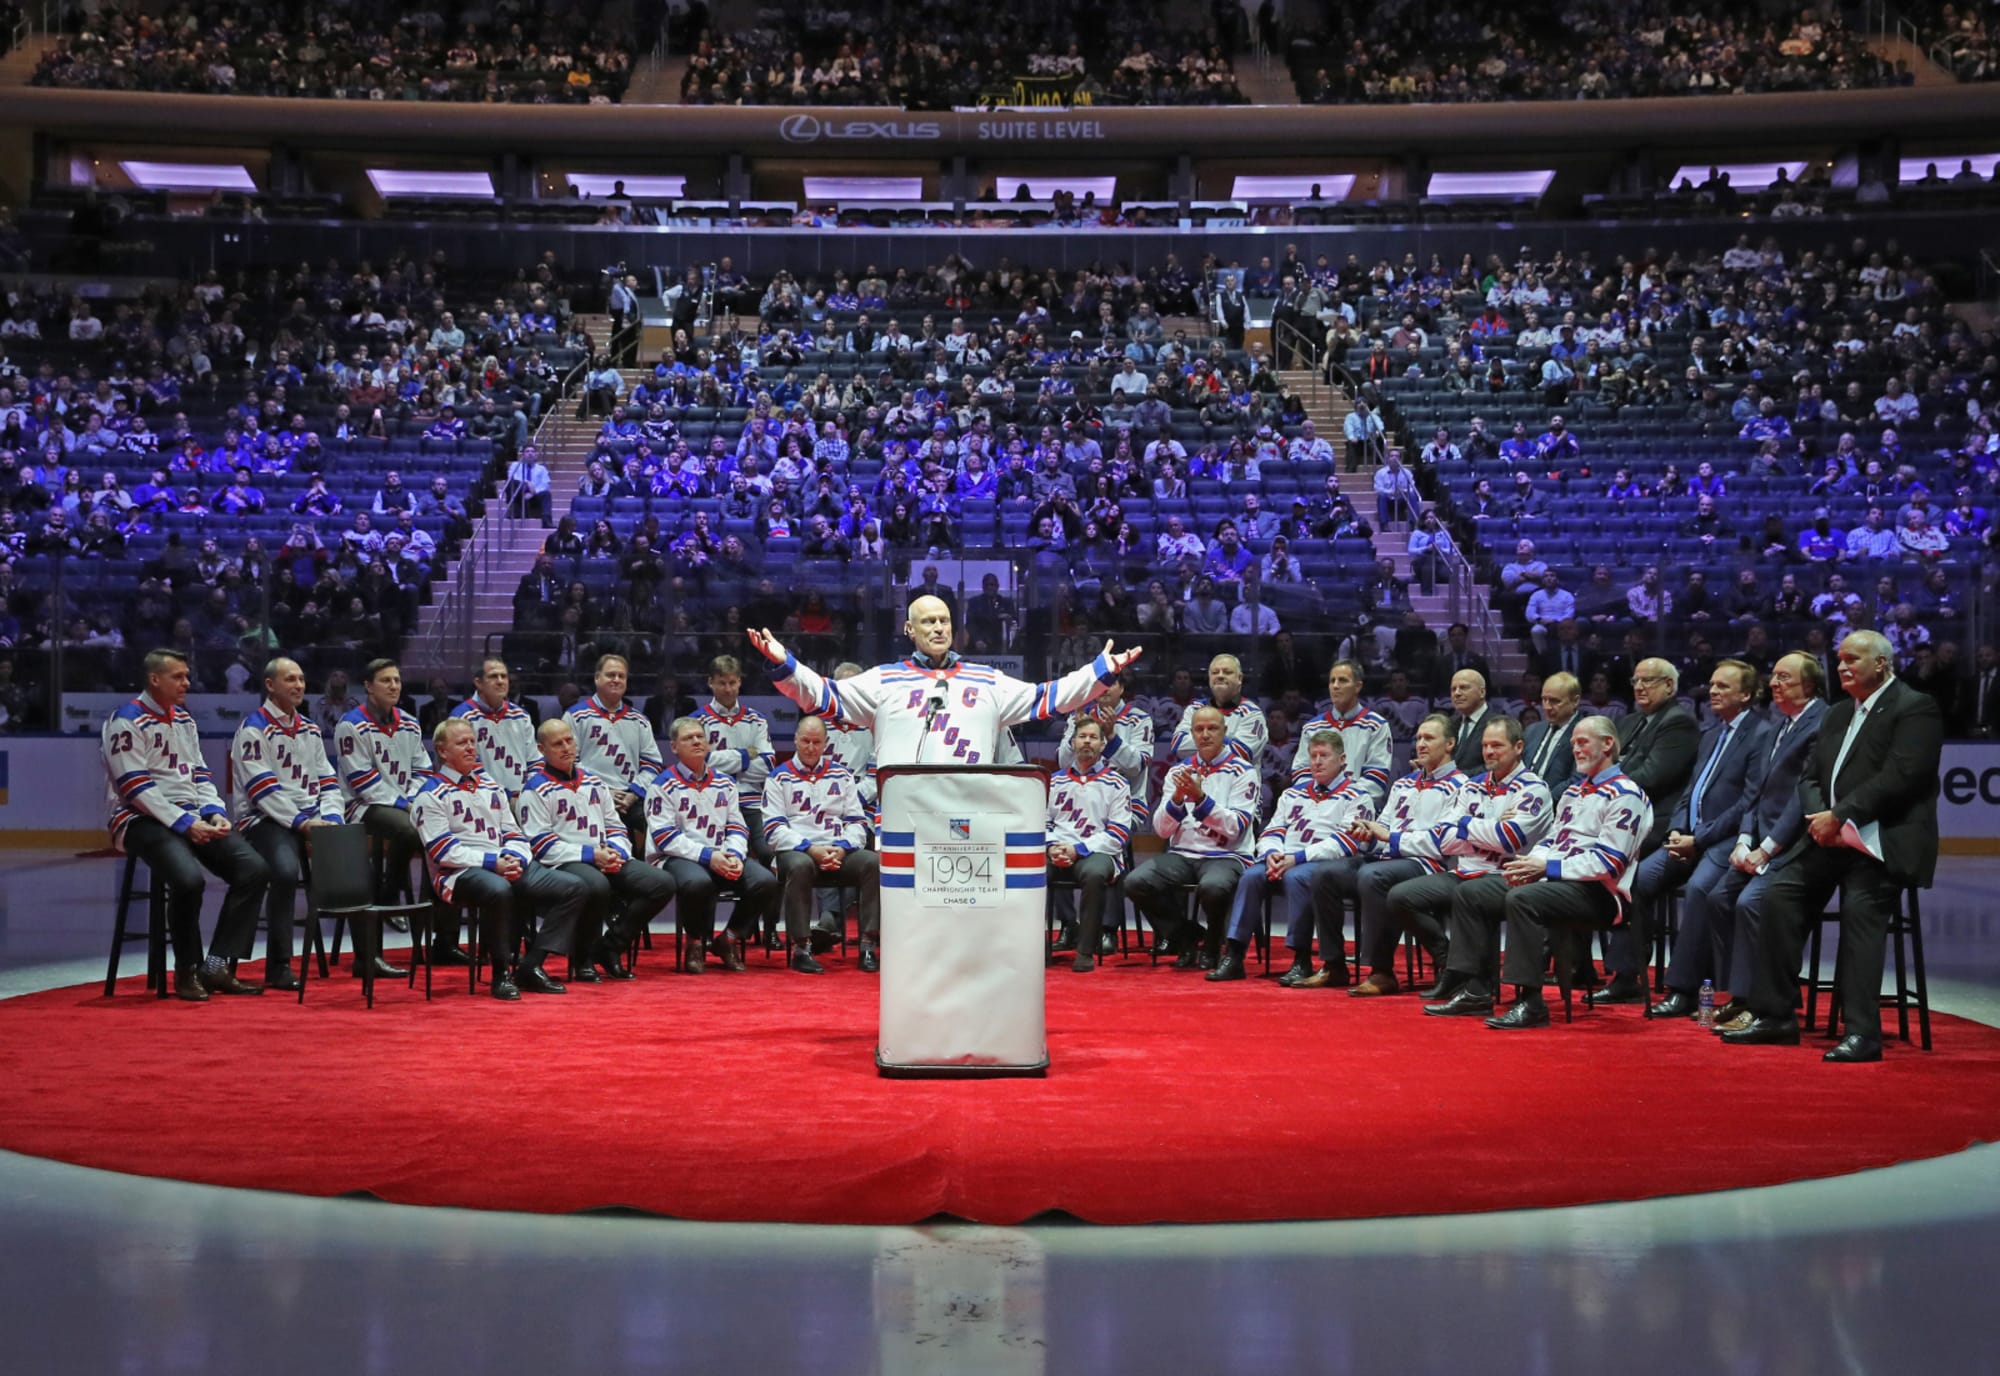 Rangers celebrate 25th anniversary of 1994 Stanley Cup